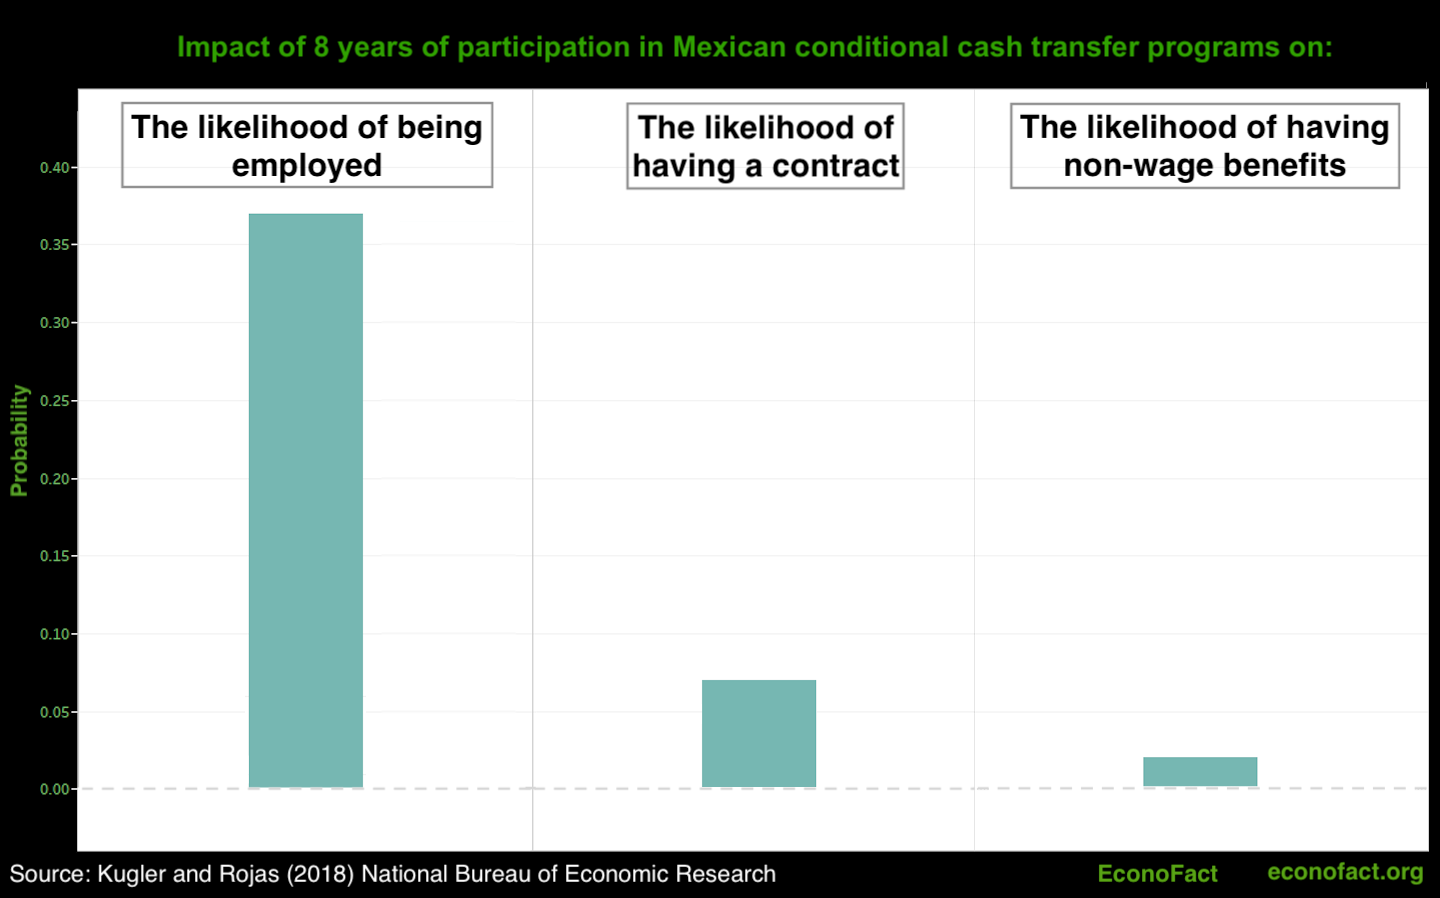 Can Conditional Cash Transfers Break the Cycle of Poverty?